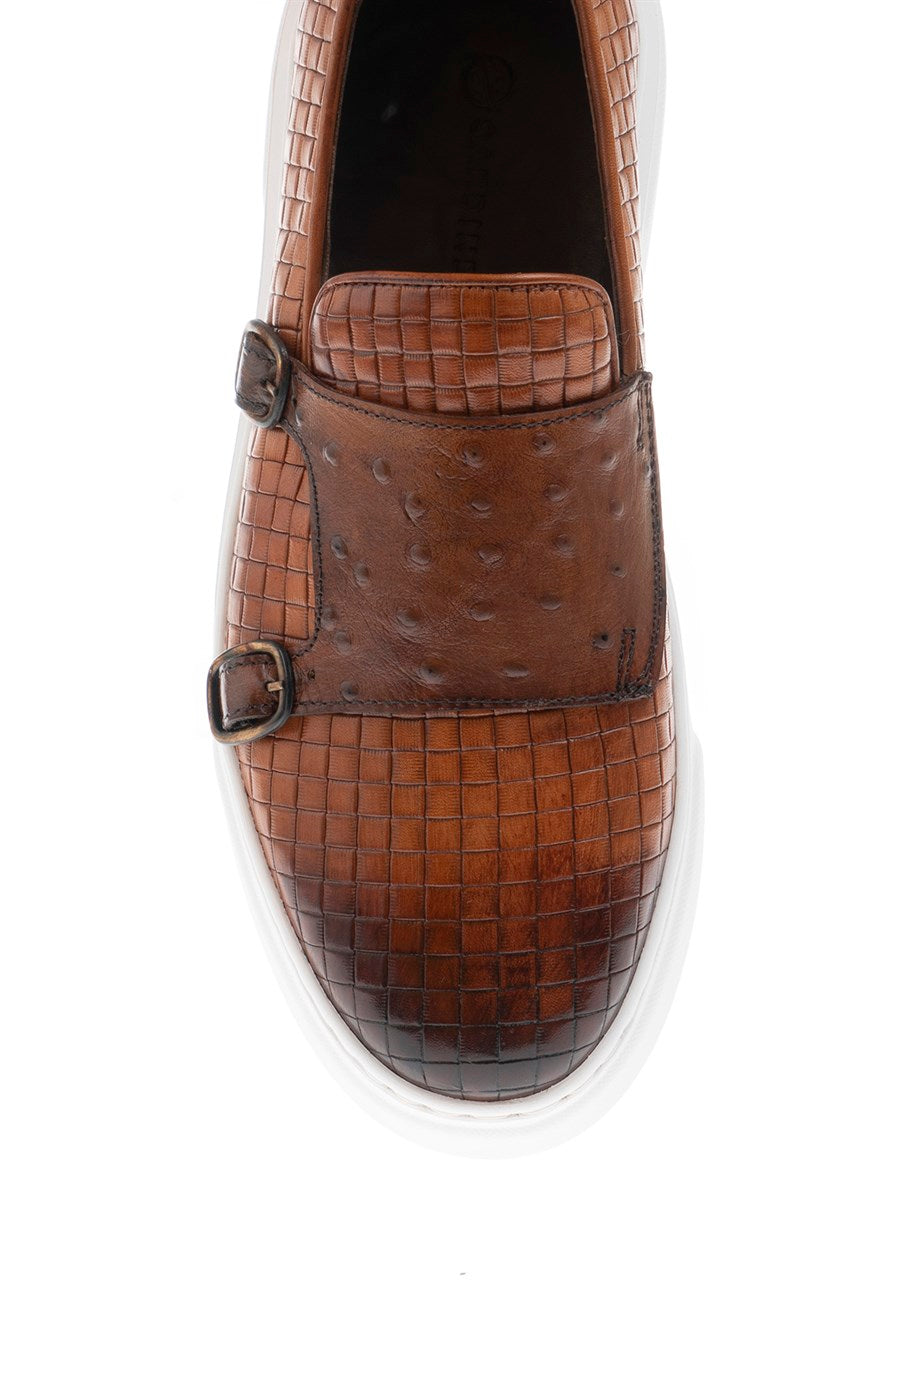 Mesh Eva Sole Genuine Leather Casual - MENSTYLEWITH